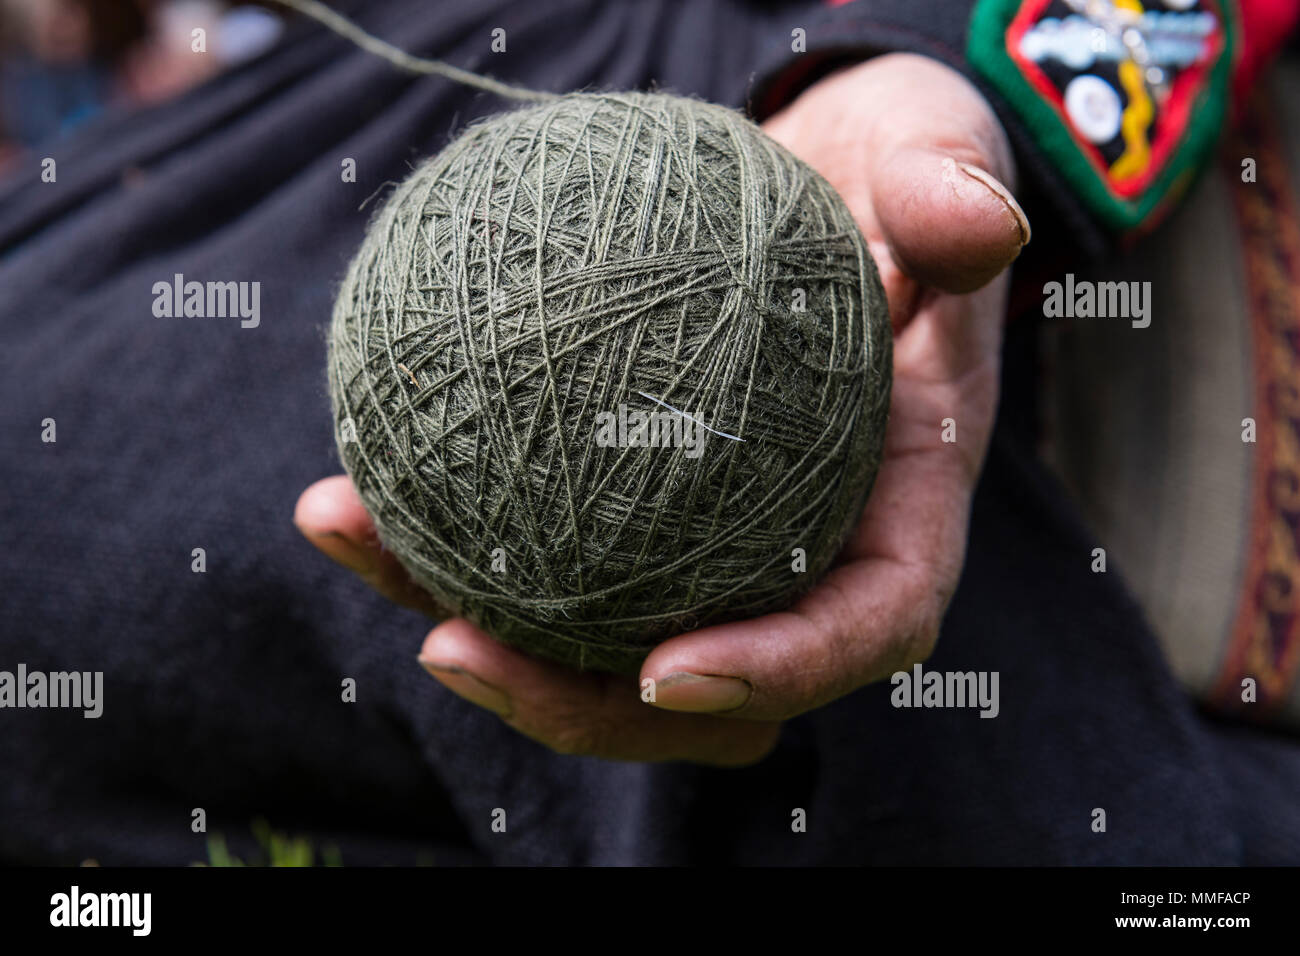 A ball of green Llama wool ready for weaving. Stock Photo